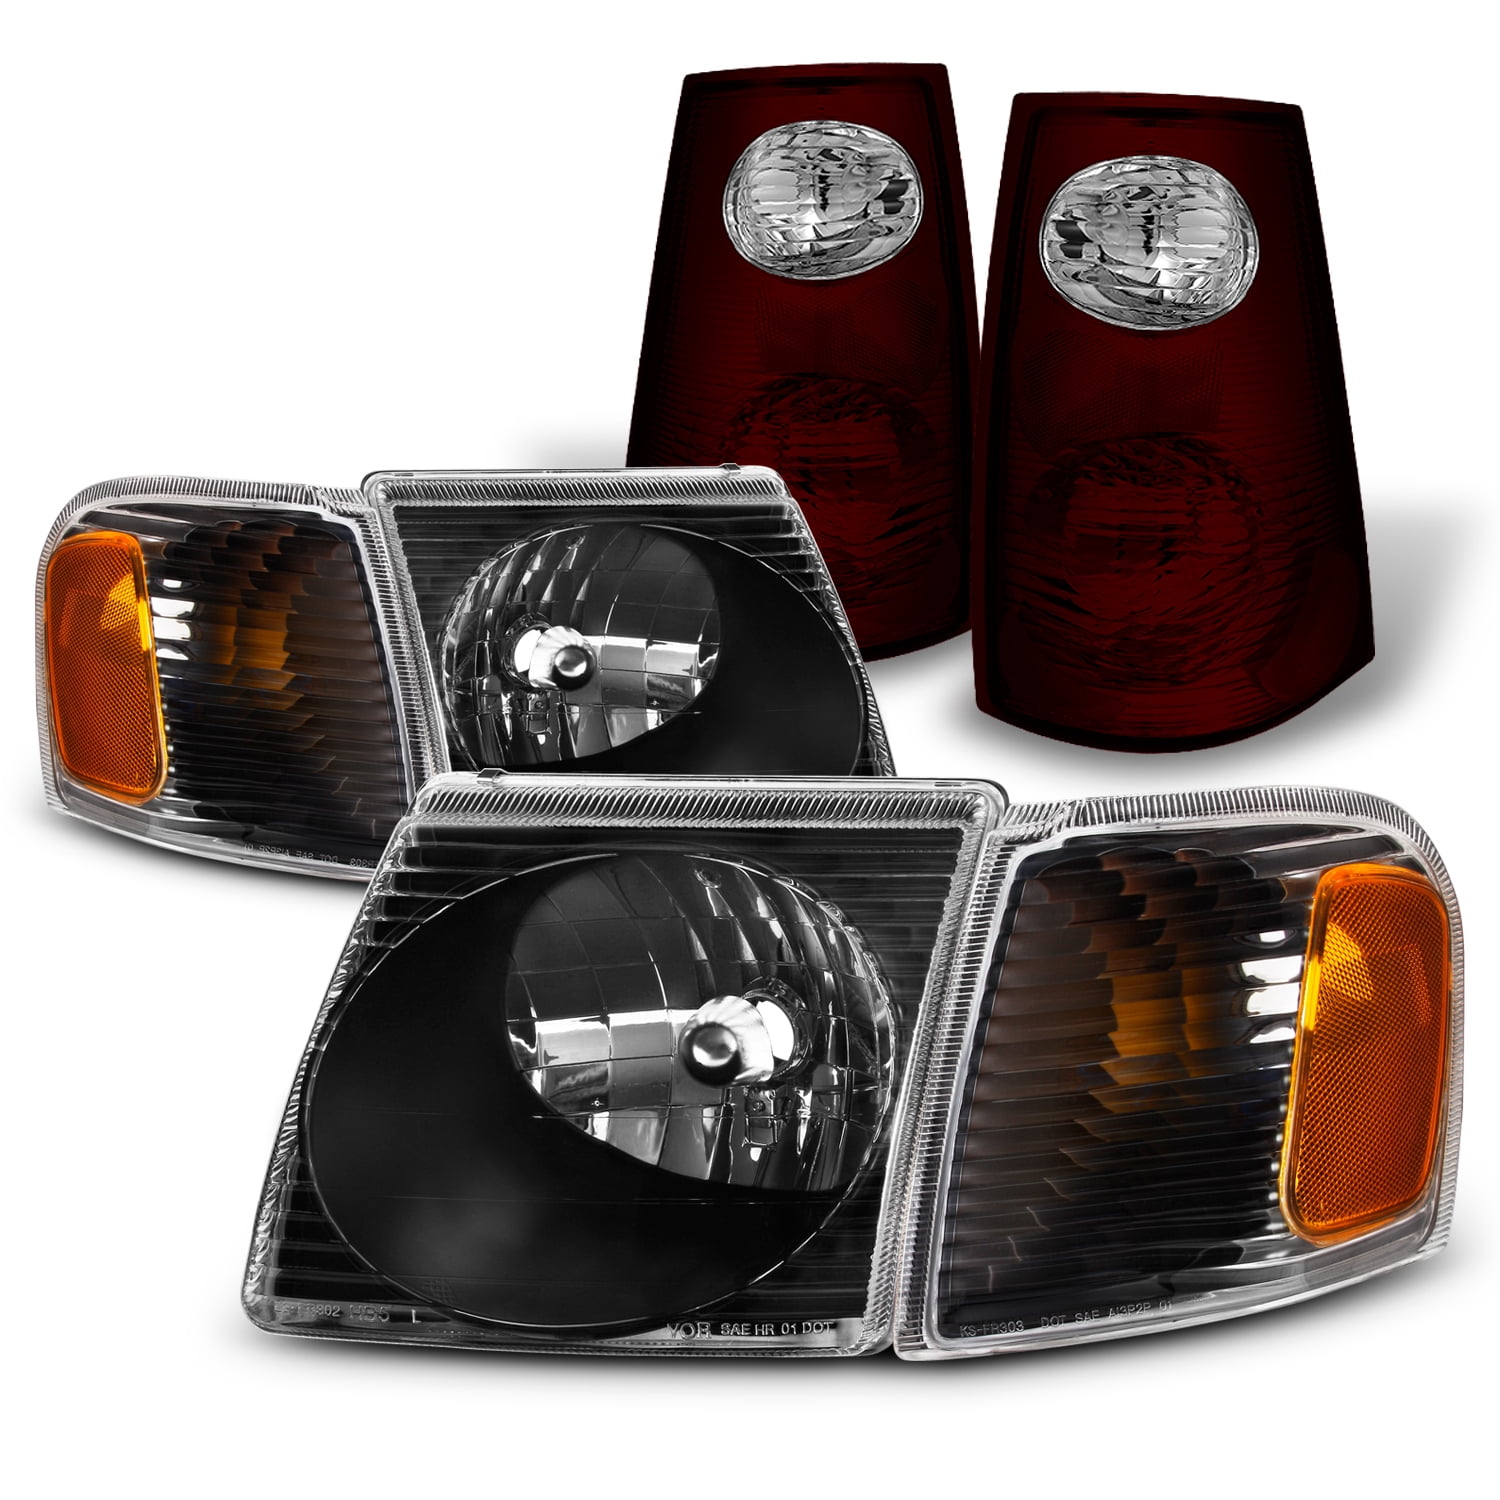 Corner Light Set Of 2 For Explorer Sport Trac 01-05 Right and Left Side Included Lens and Housing 